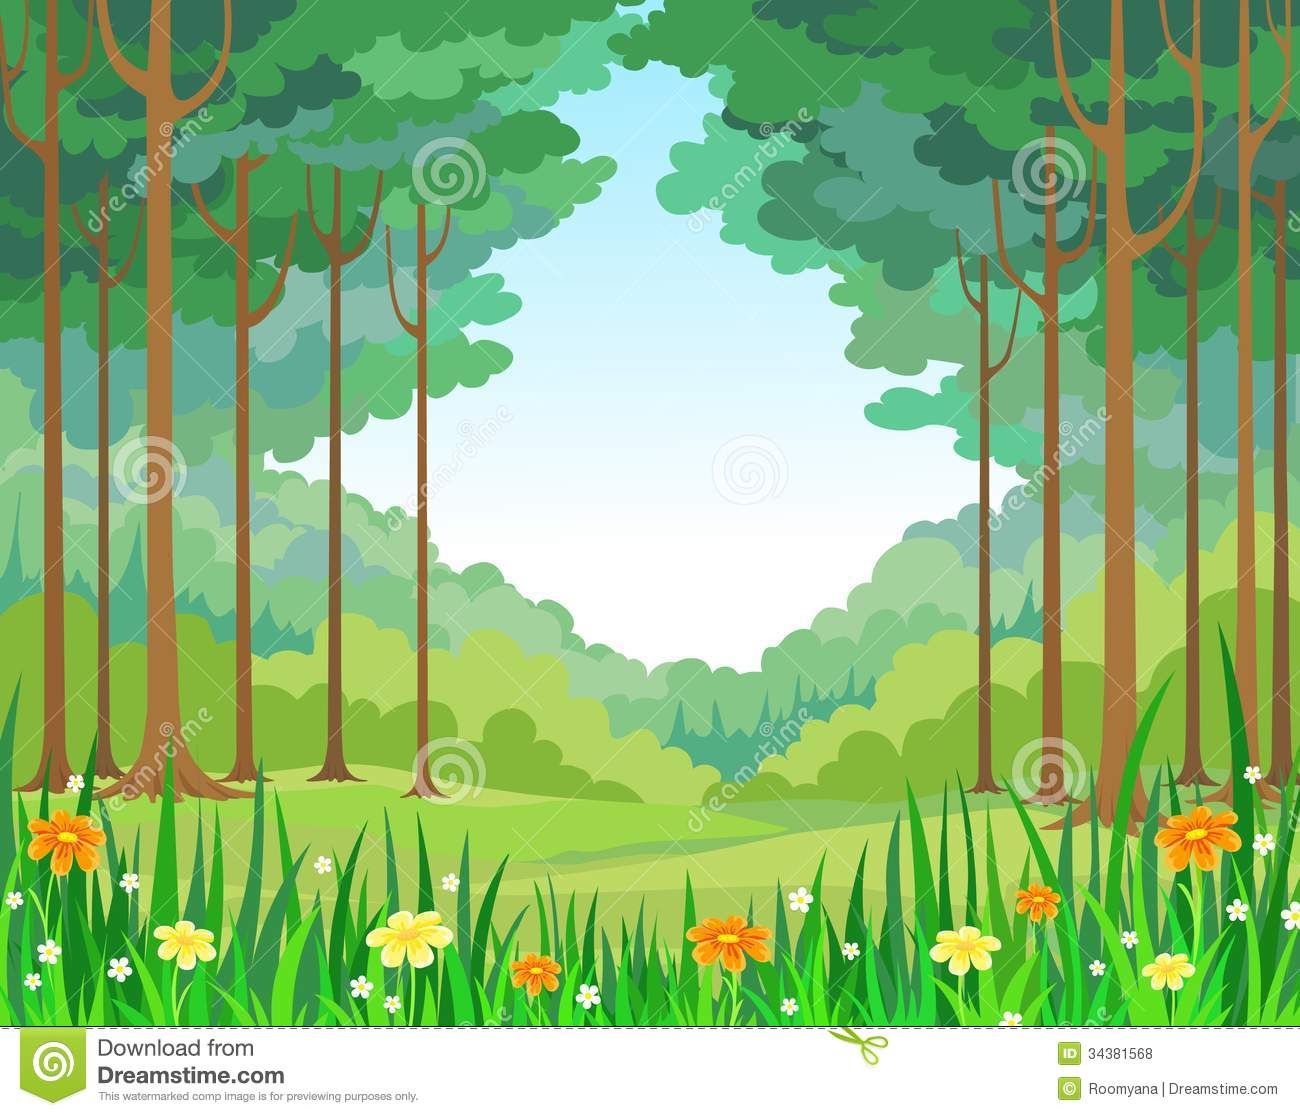 Stylized forest stock.